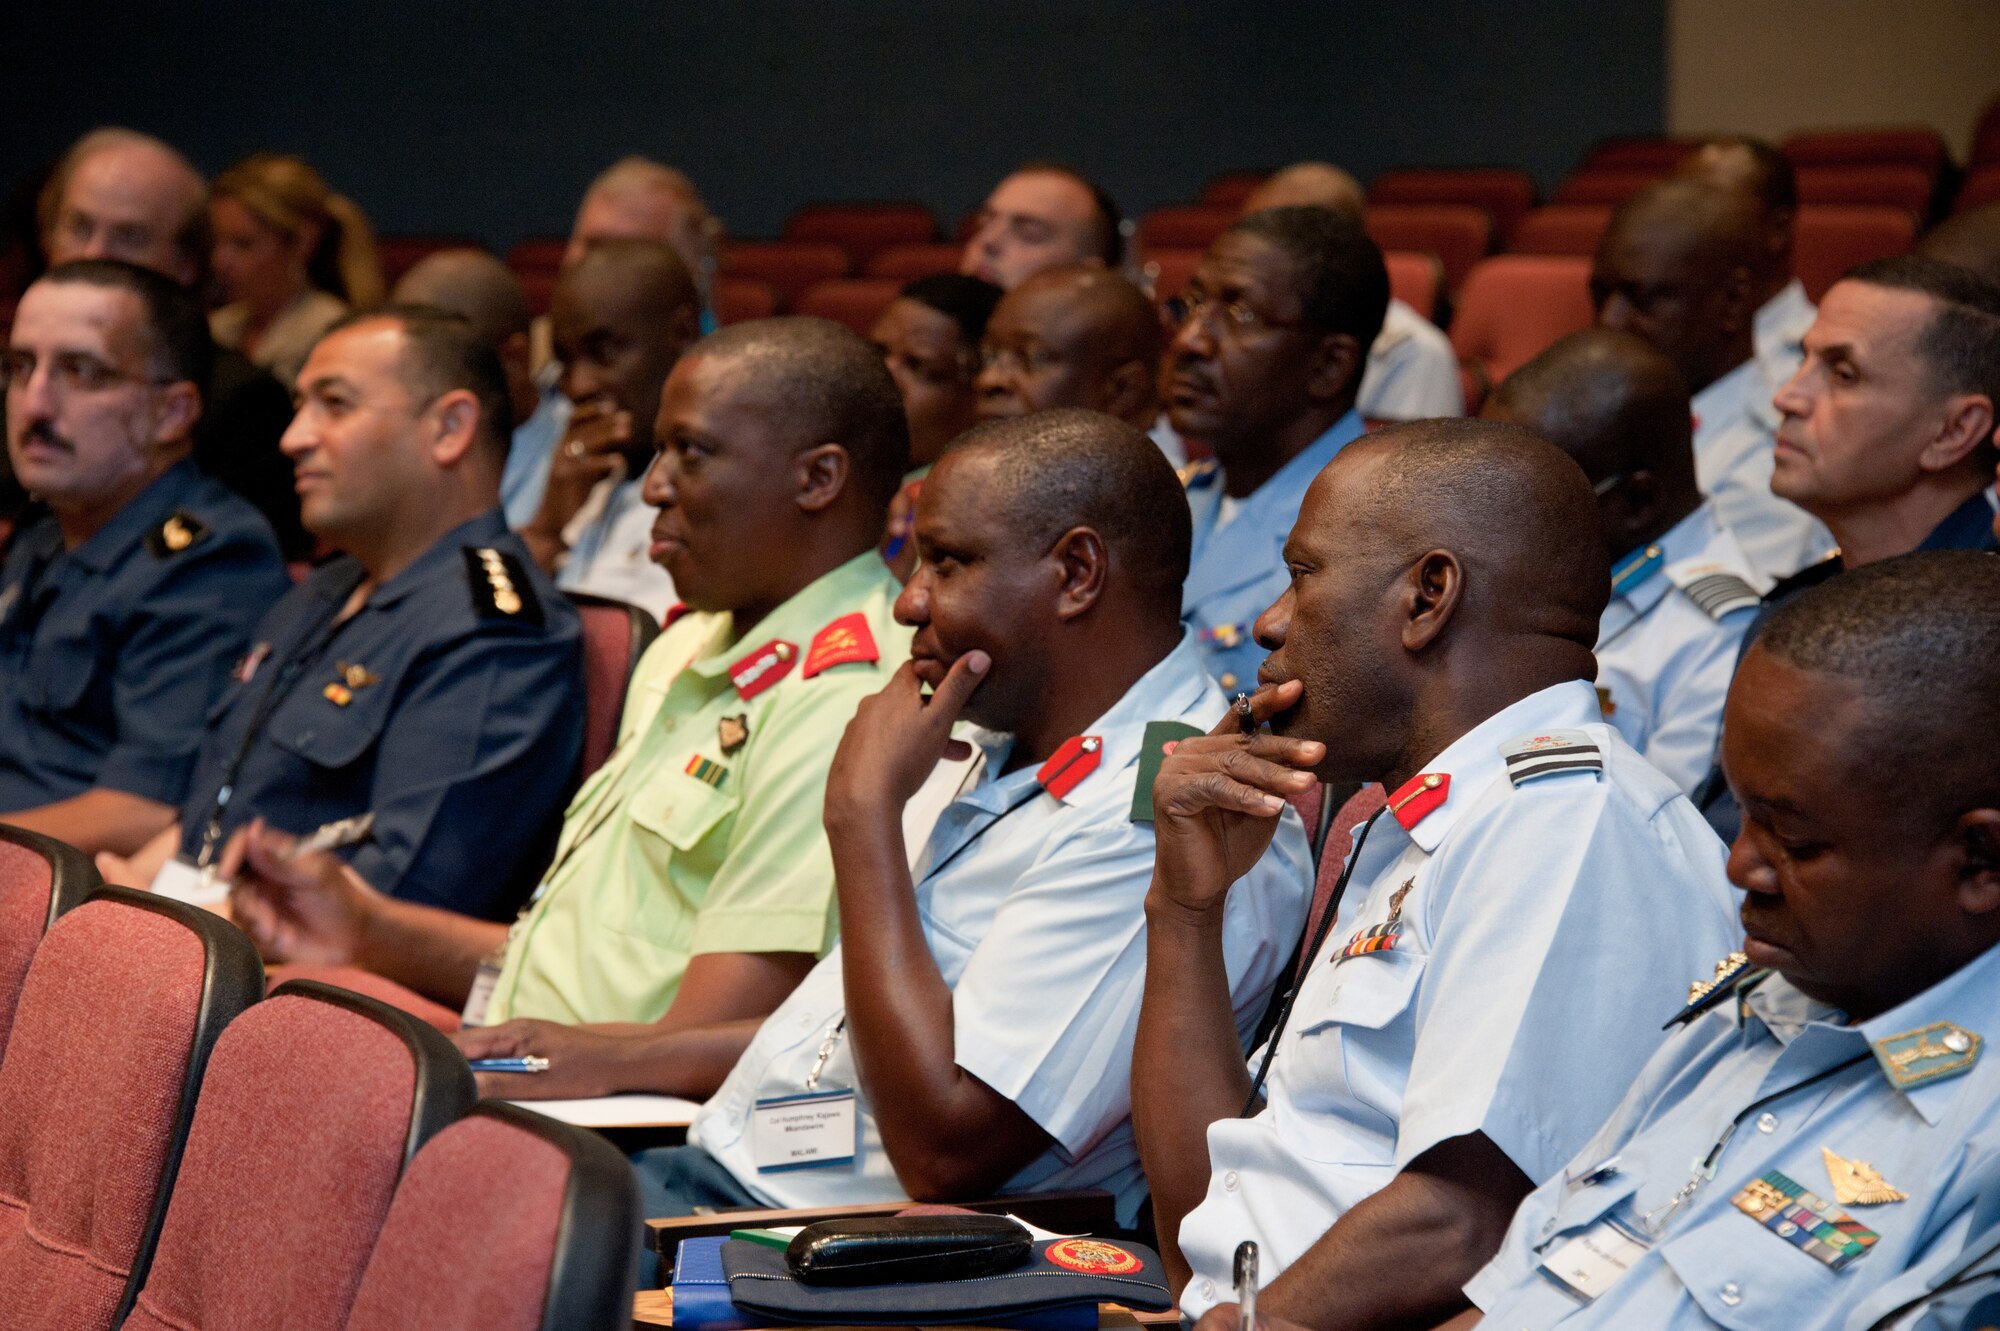 Maxwell AFB, Ala. –African officers listen to Maj. Gen Donald C. Ralph, Mobilization Assistant to the Commander, U.S. Air Forces Europe; U.S. Air Forces Africa, Commander Air Component Command, Ramstein Air Base, Germany provide the keynote address to the AFRICOM symposium attendees at Air War College, Jun 11, 2013.  The AFRICOM Symposium is an event designed to bring together military members of African nations to build relationships and partnerships with members of other African countries. Many of the attendees are previous graduates from the US Air Force's Air Command & Staff College and/or Air War College.  (US Air Force photo by Melanie Rodgers Cox/Released)